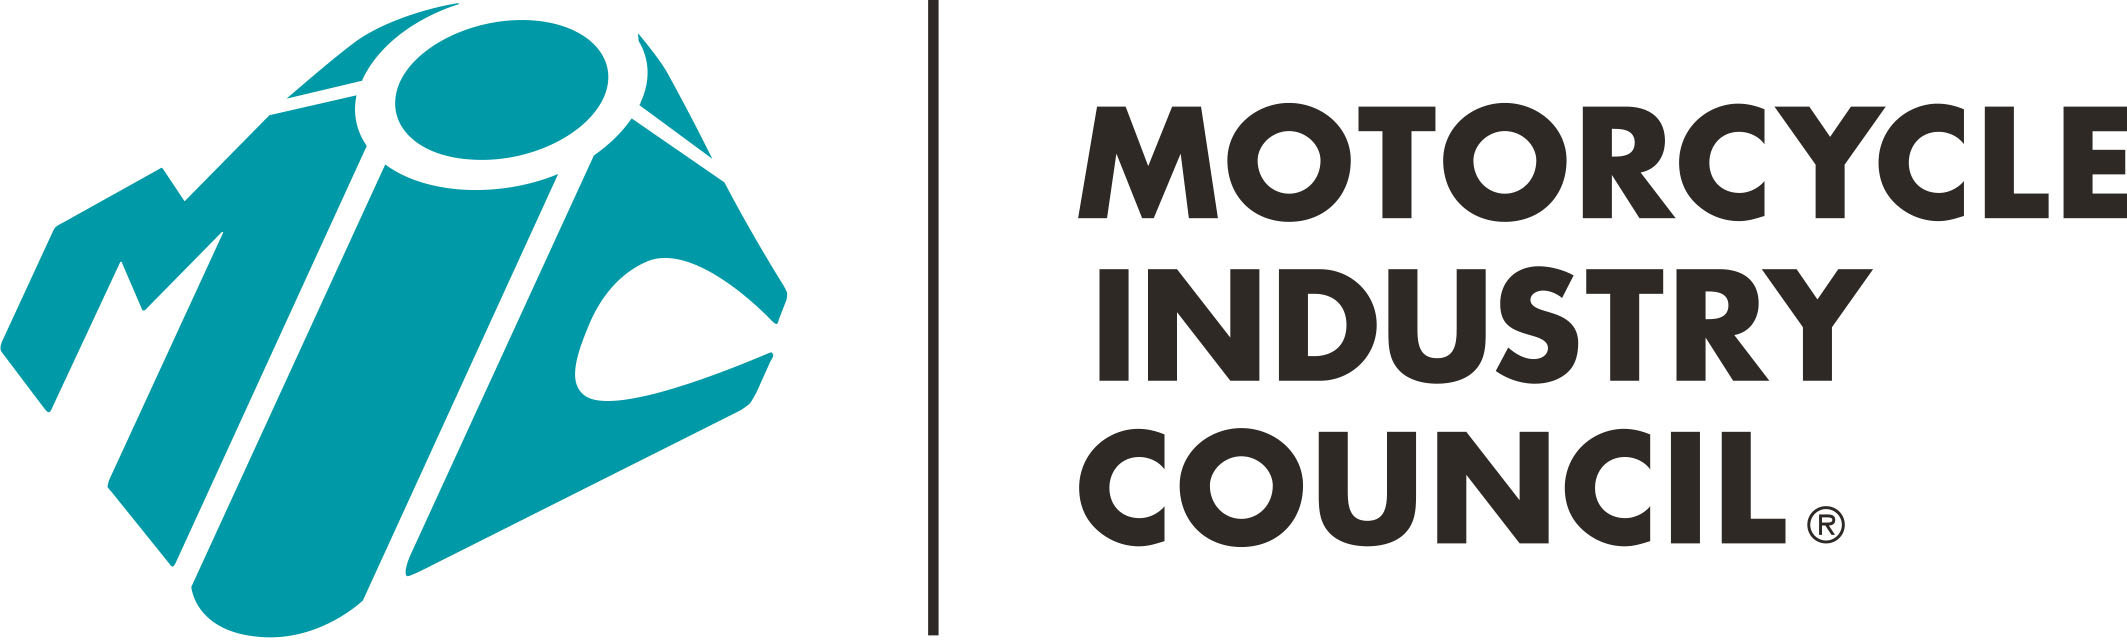 Motorcycle Industry Council logo